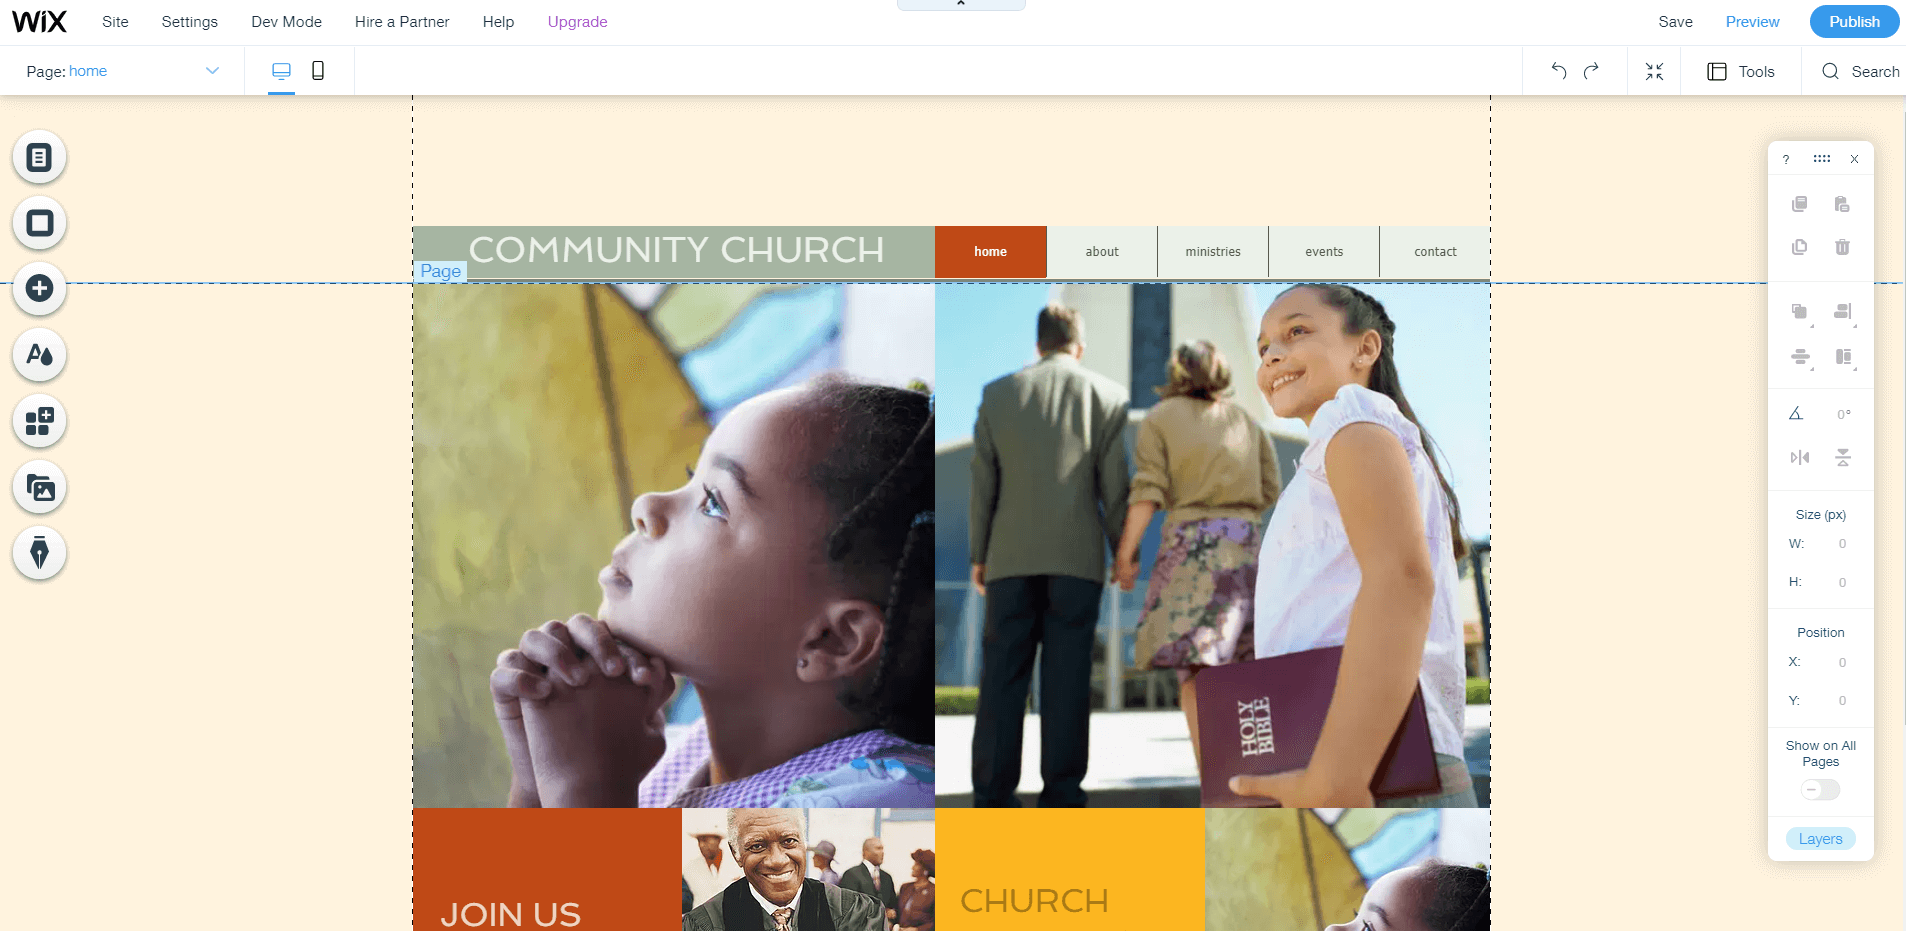 Wix is one of the best church website builders available, as shown by this church-centric template.